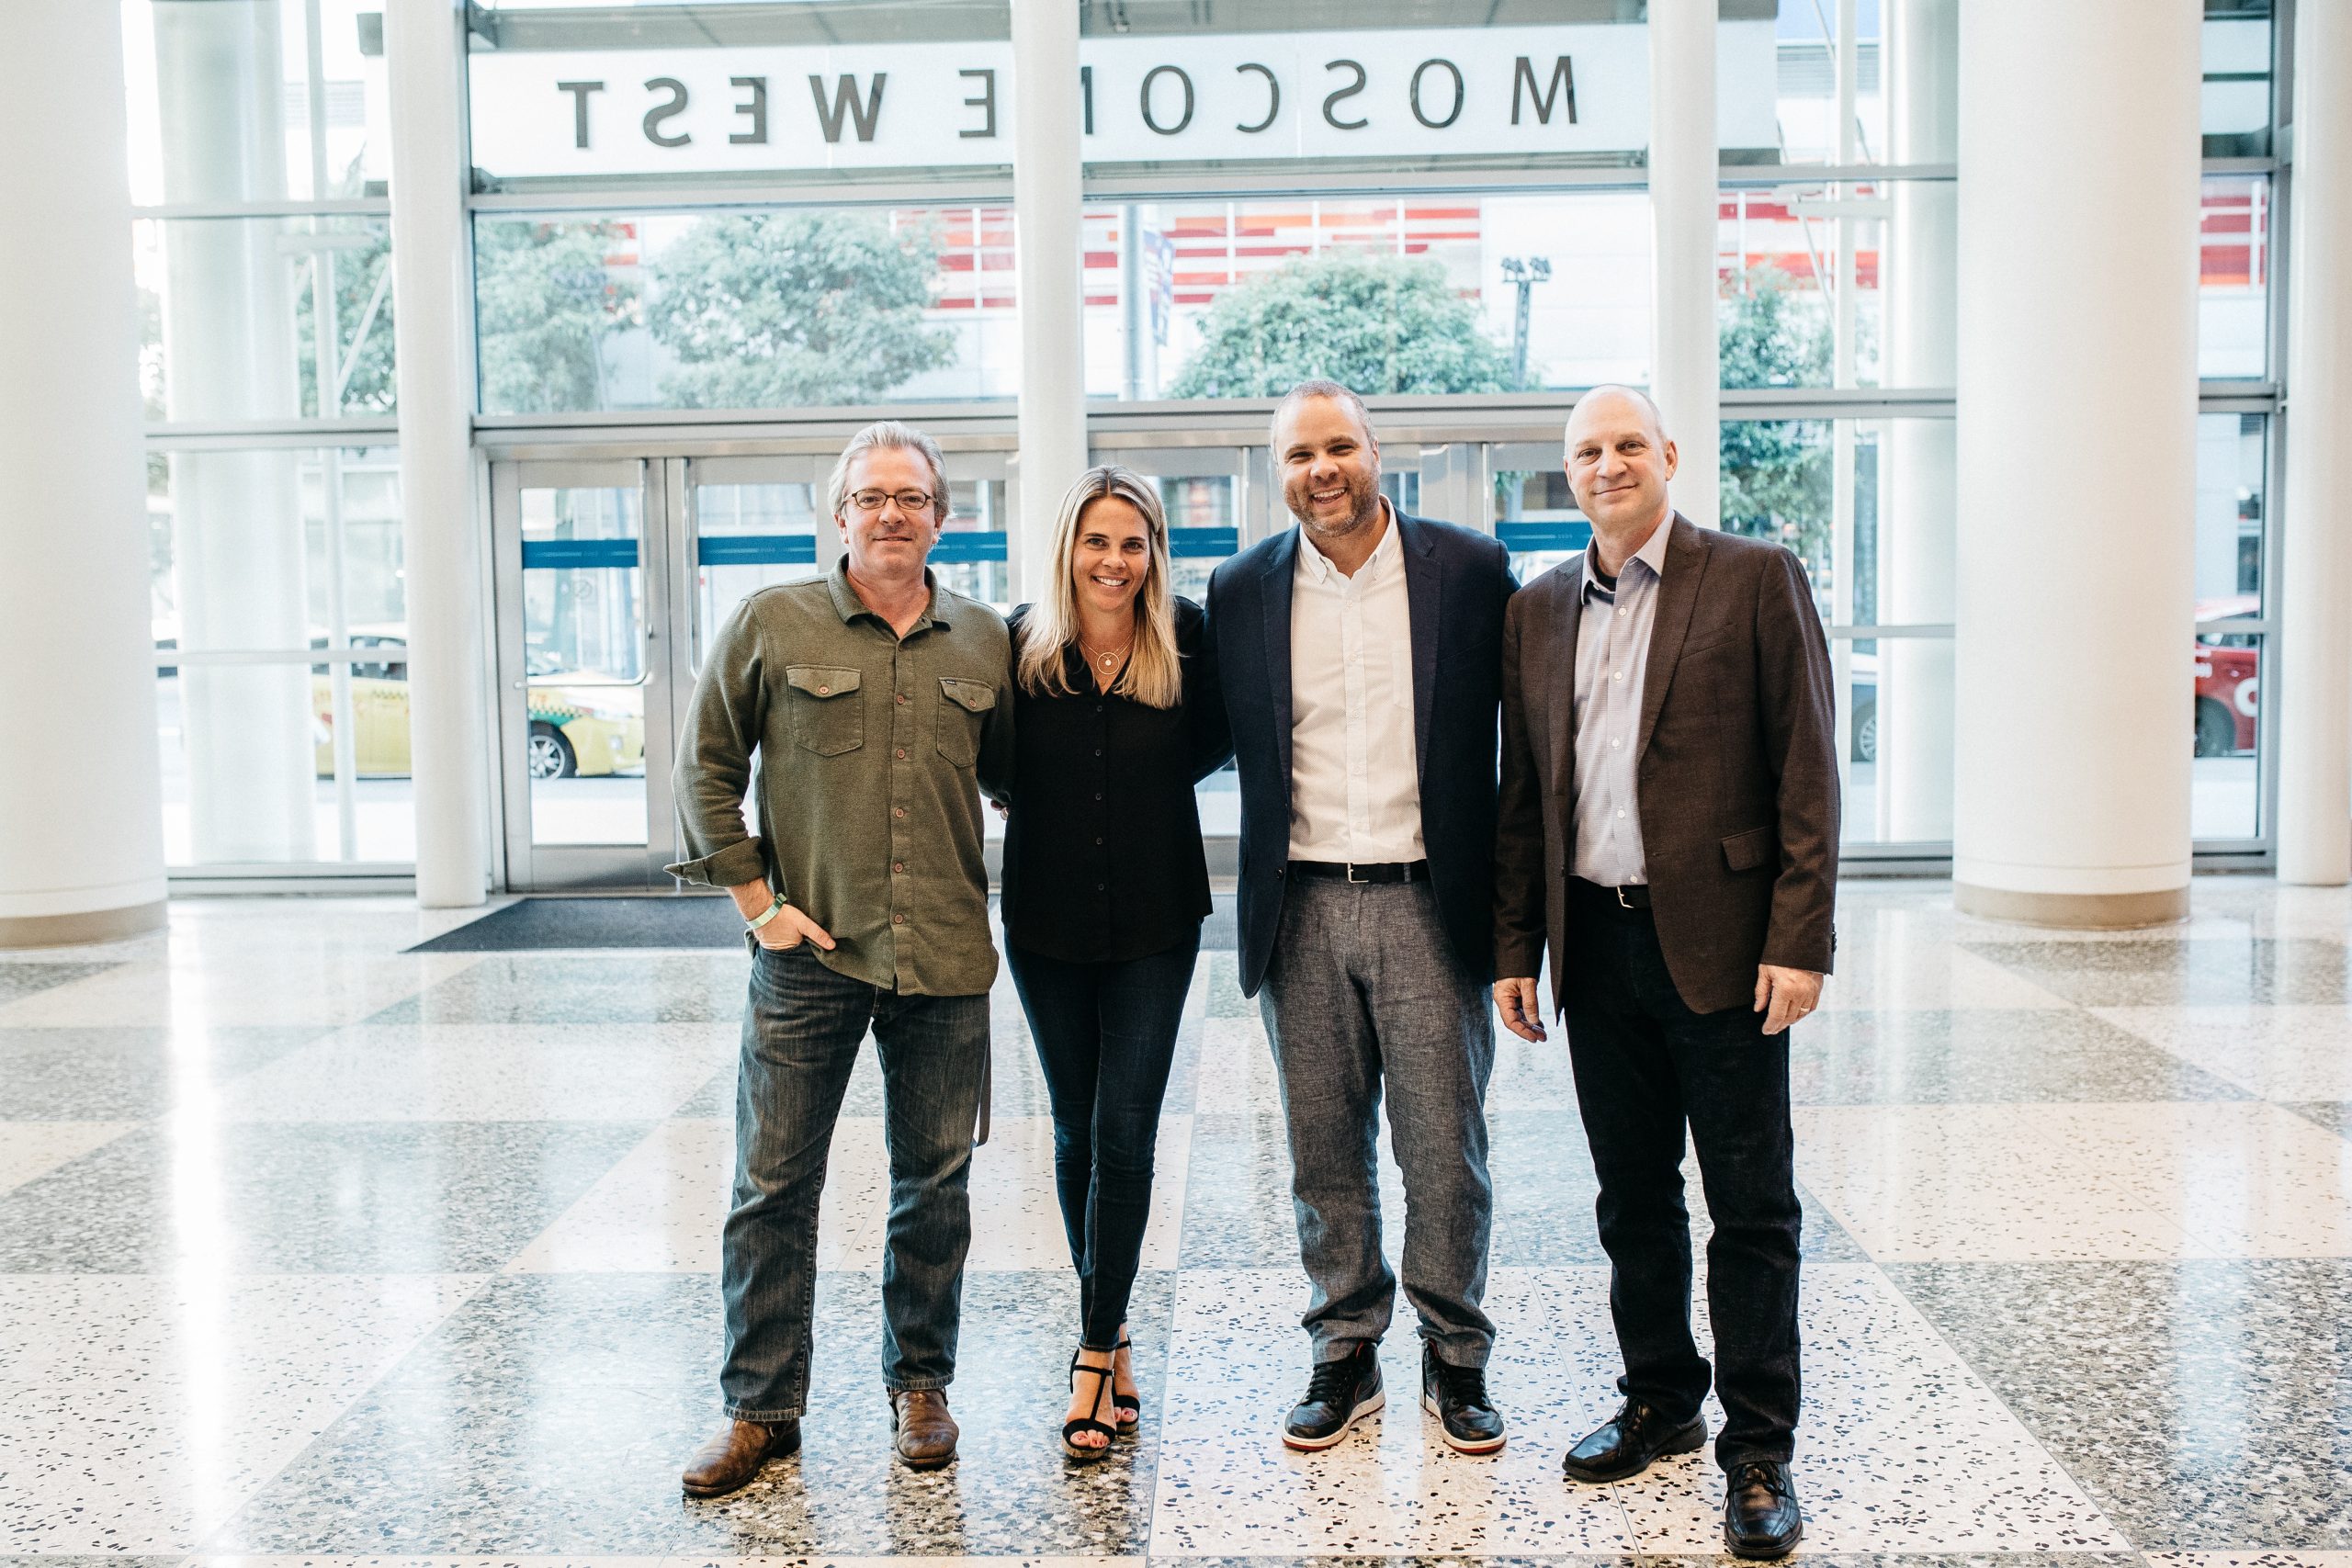 The leadership team at Manifold: Brian Mullin, Kelly Long, Sean Florio and Mike Weaver share their view on trends in experiential marketing in 2020. 